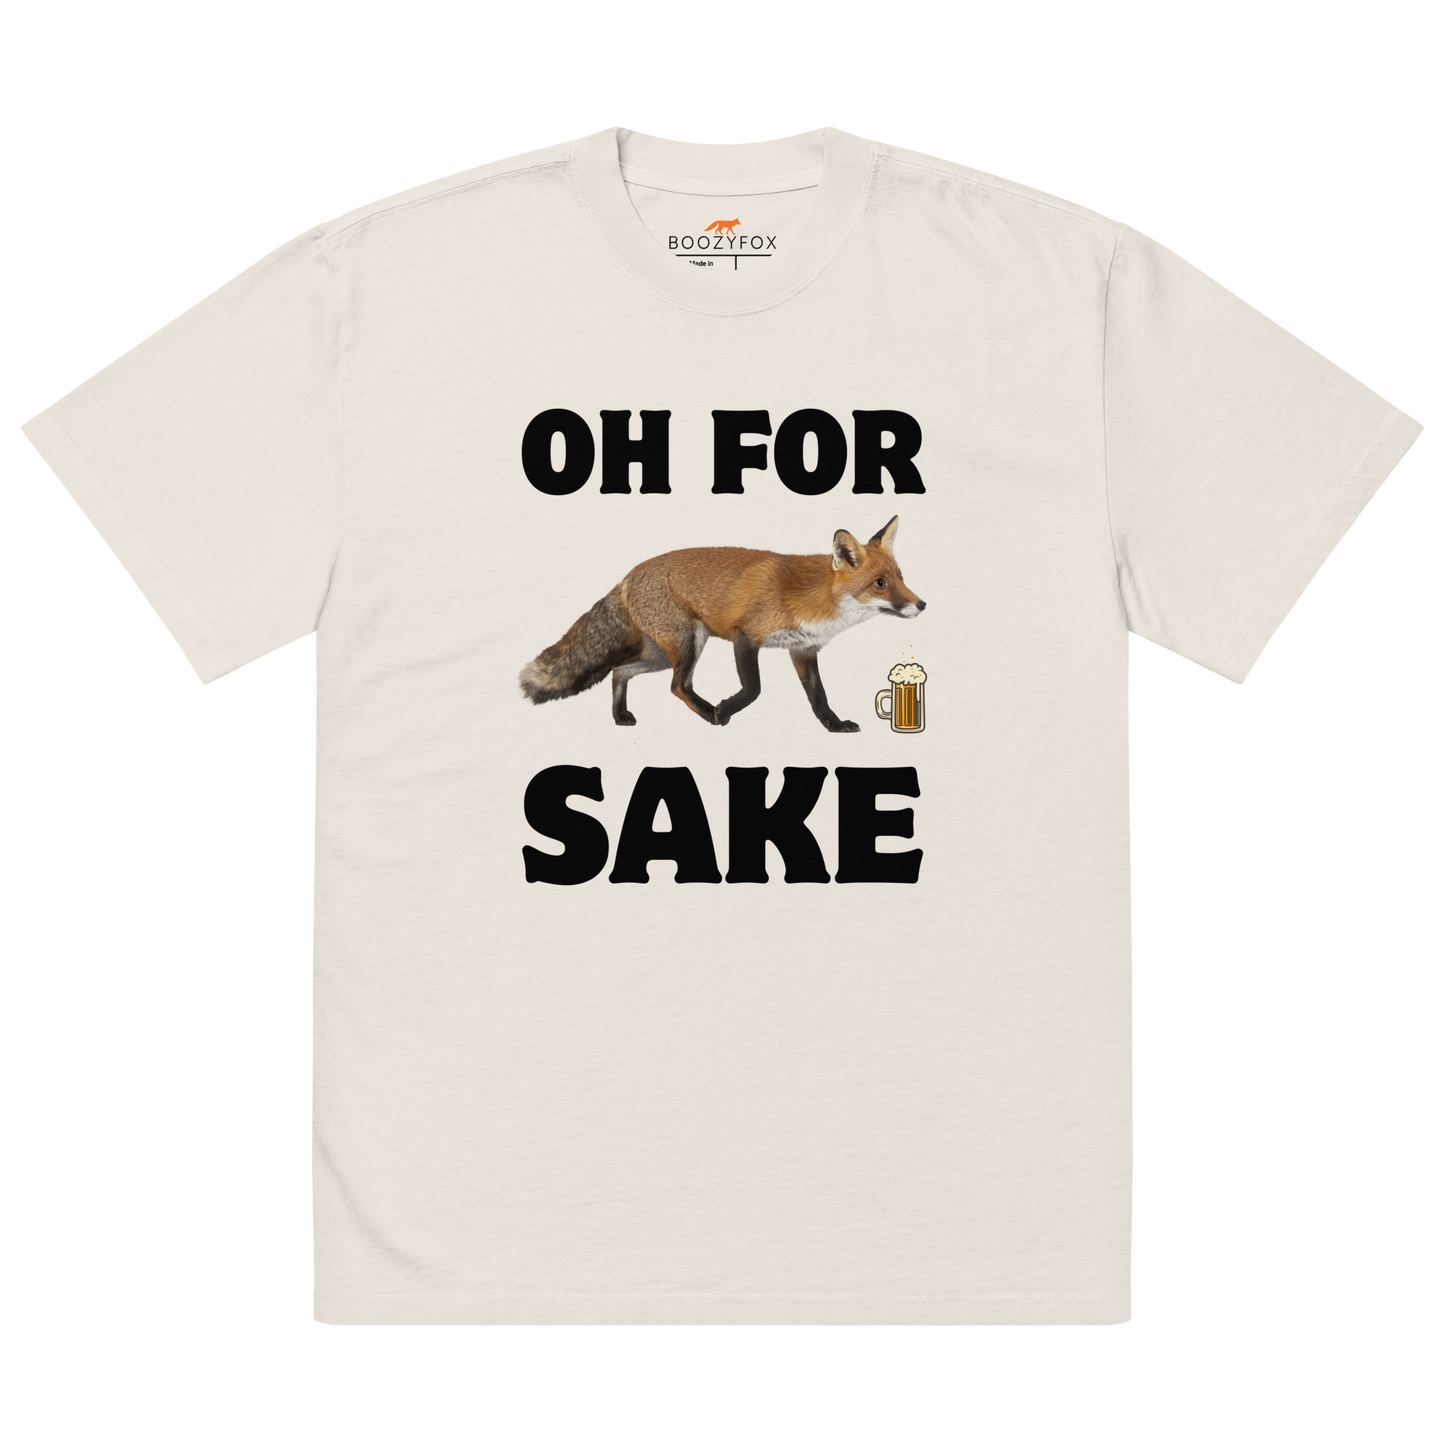 Faded Bone Fox Oversized T-Shirt featuring a Oh For Fox Sake graphic on the chest - Funny Graphic Fox Oversized Tees - Boozy Fox